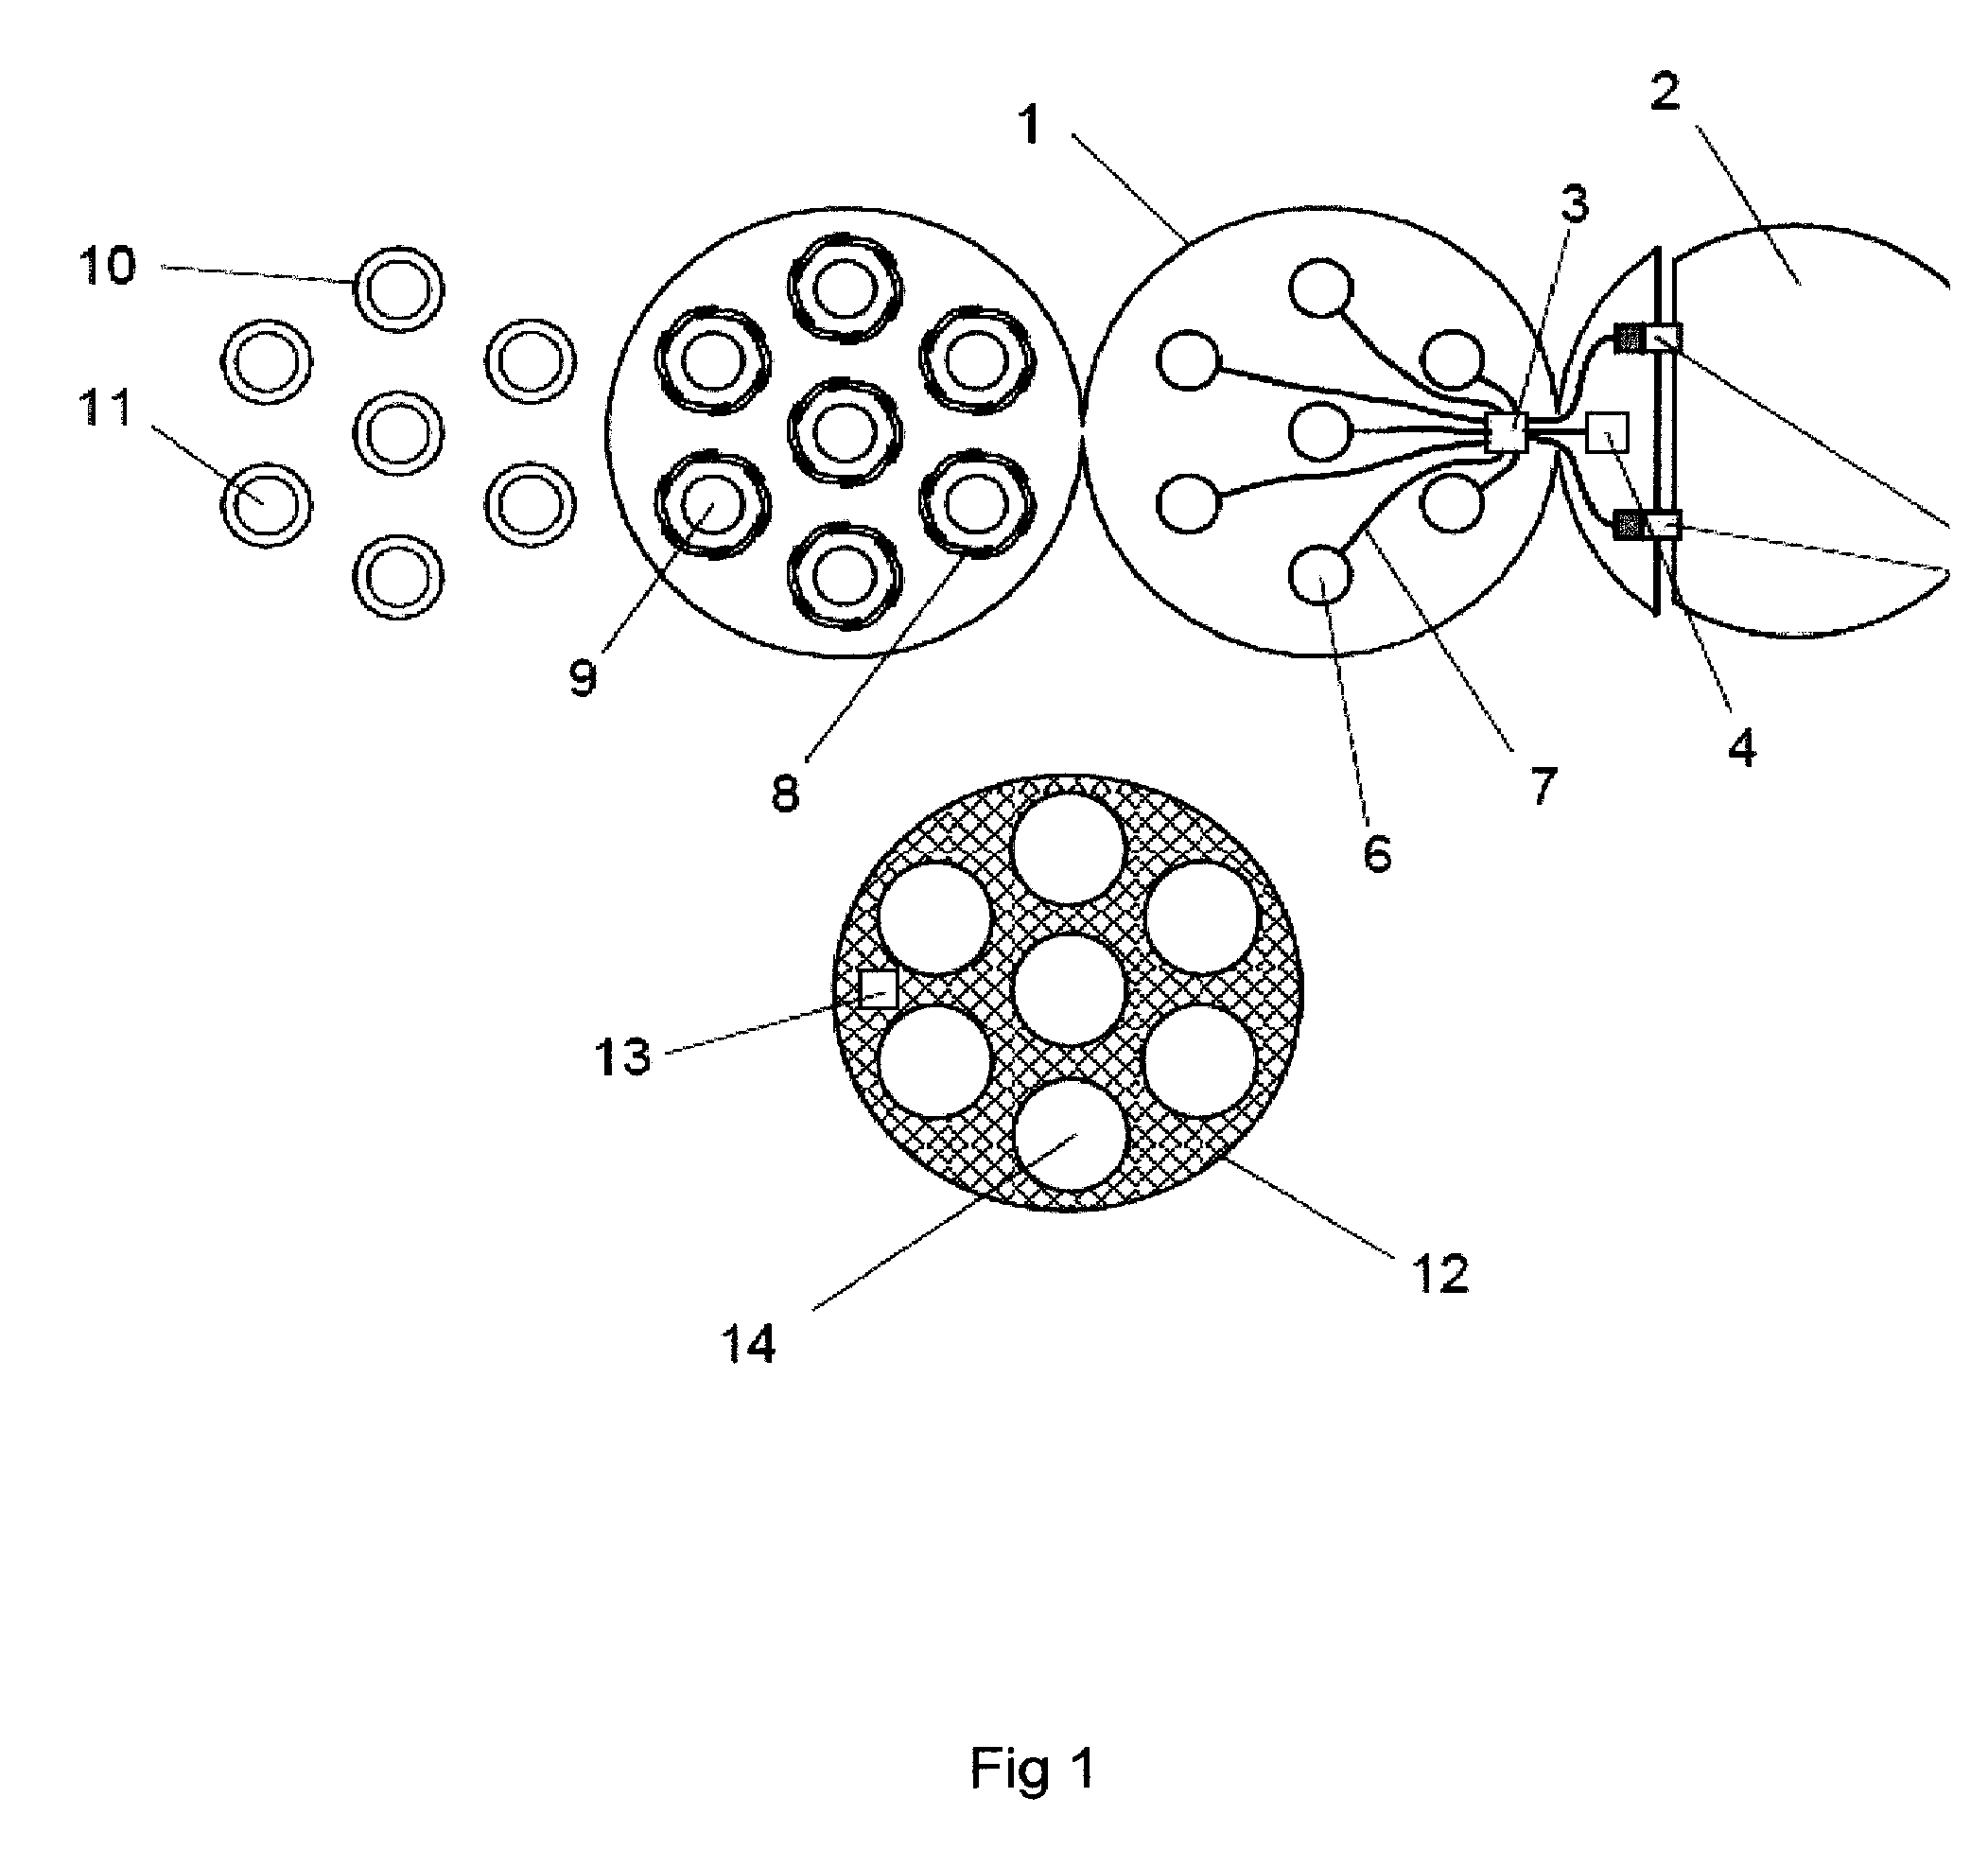 Flexible wireless patch for physiological monitoring and methods of manufacturing the same